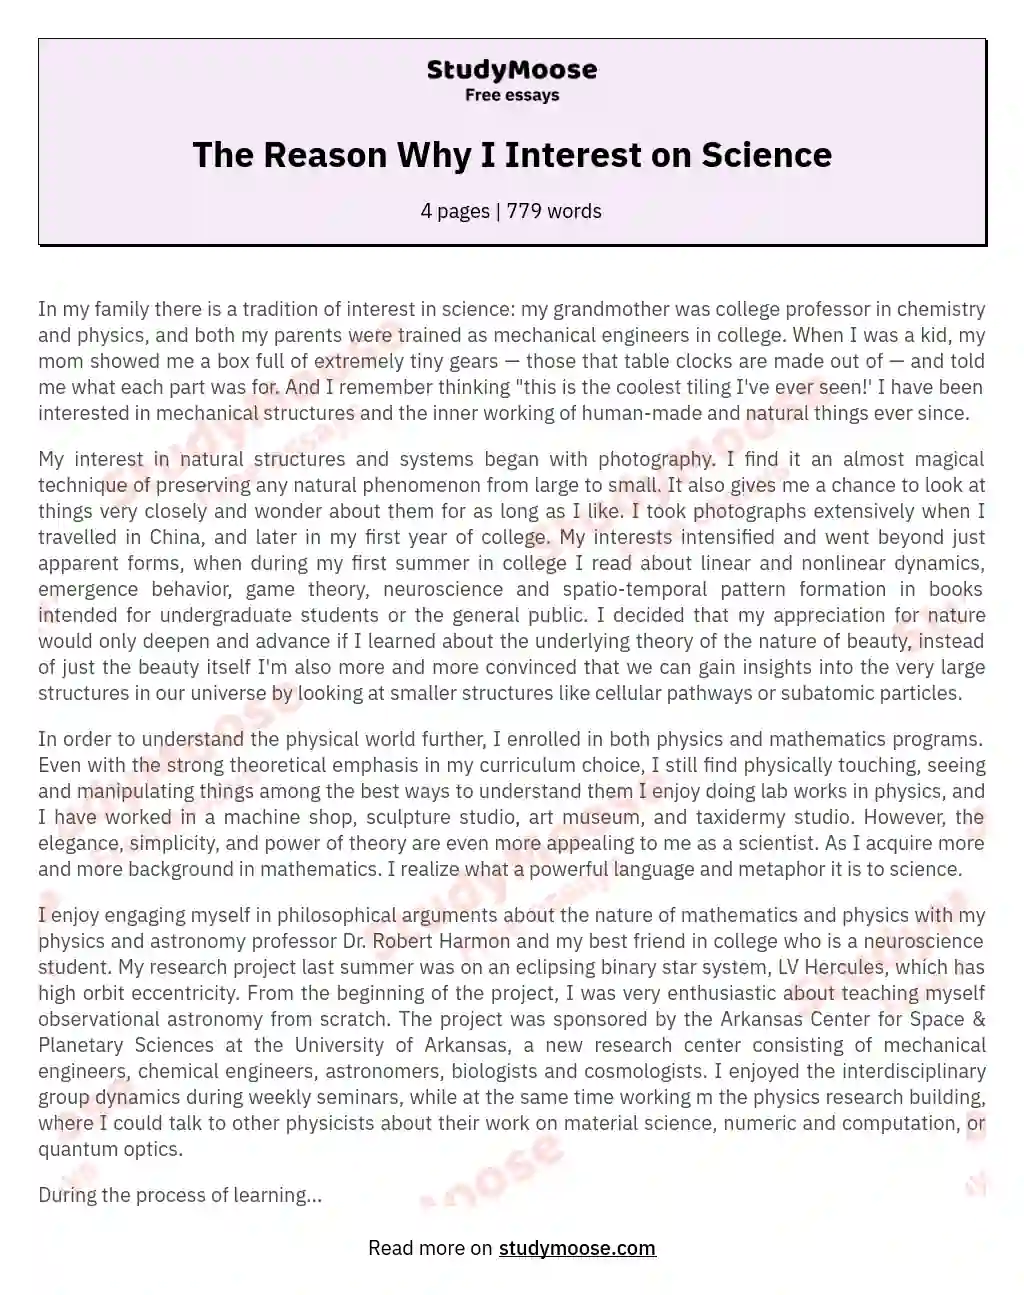 The Reason Why I Interest on Science essay